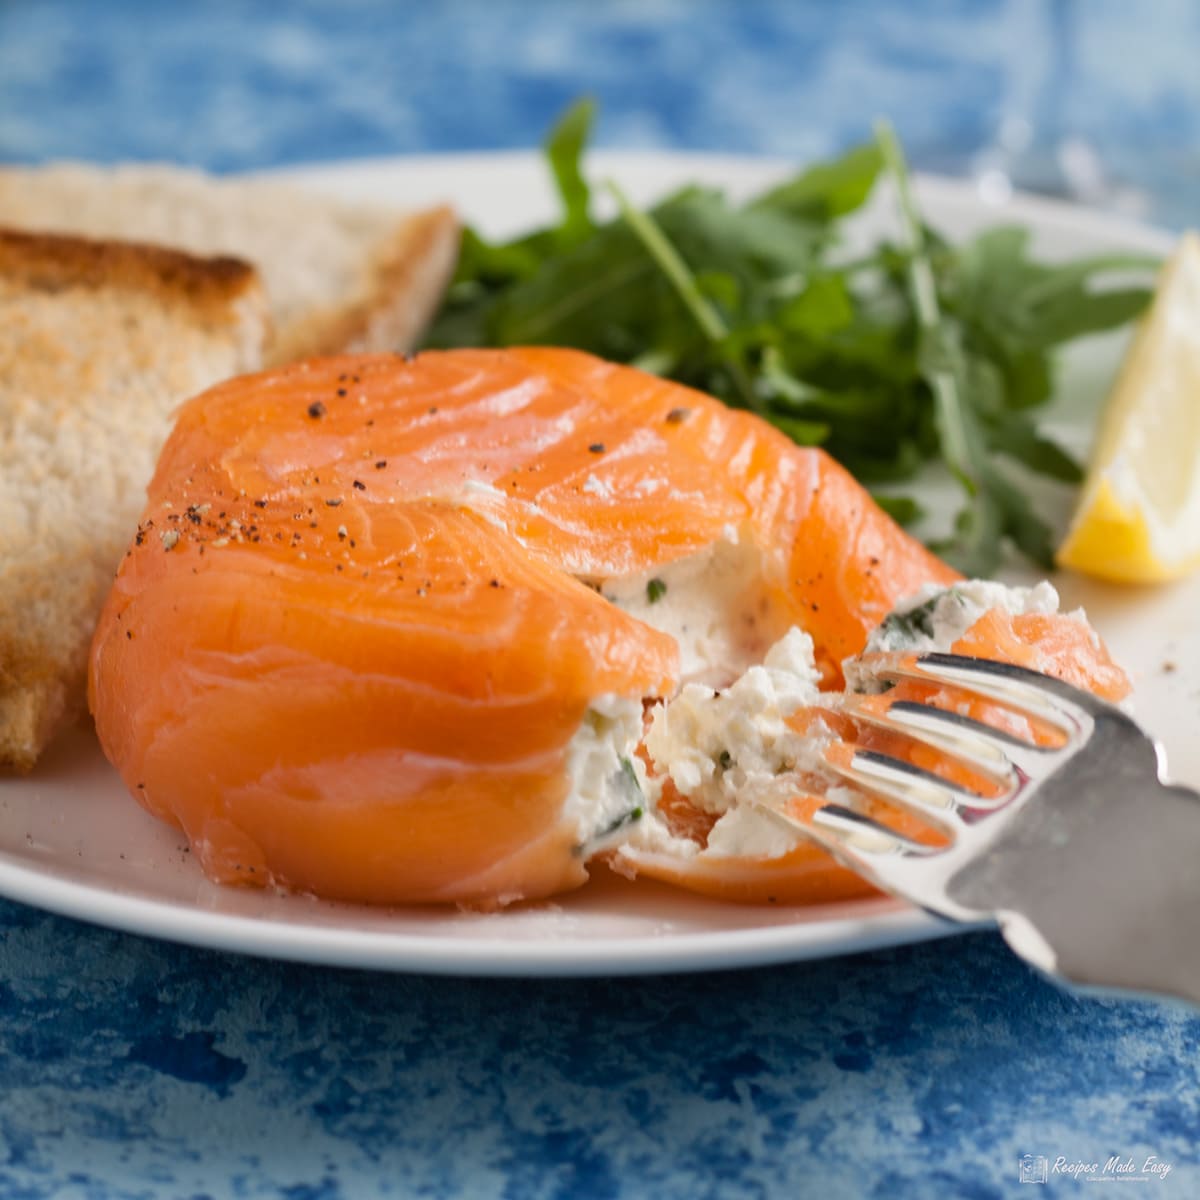 smoked salmon parcel opened with fork showing cream cheese filling.